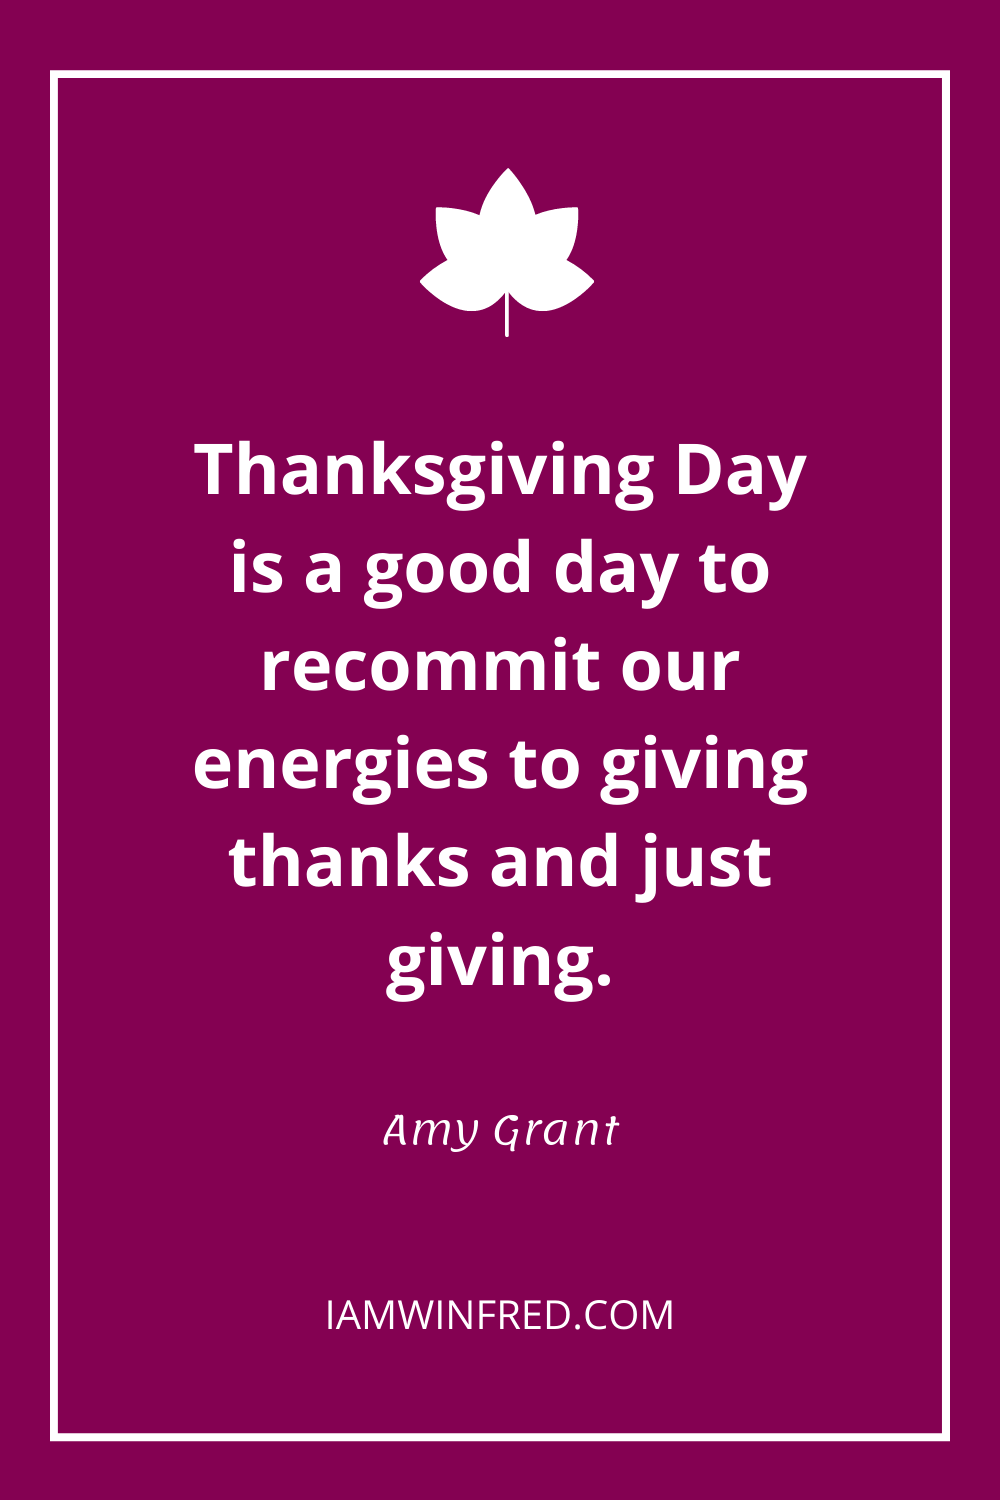 Thanksgiving Day Is A Good Day To Recommit Our Energies To Giving Thanks And Just Giving.